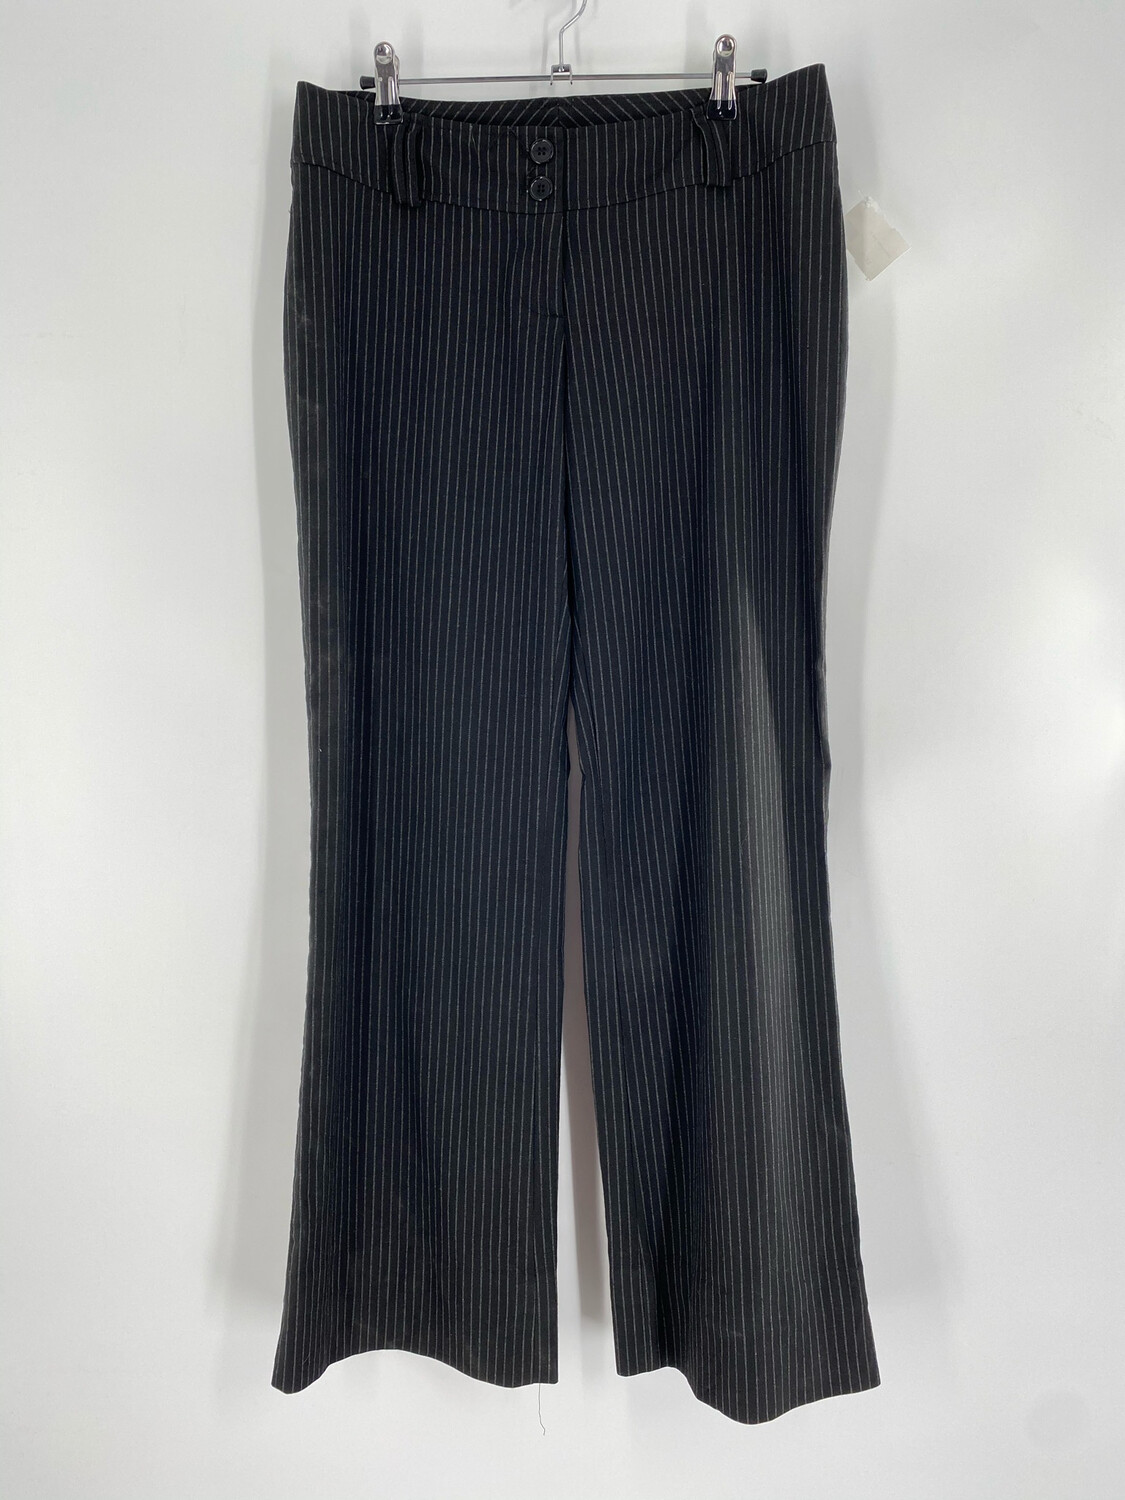 Clk Low-rise Black And White Striped Flare Pants Size M